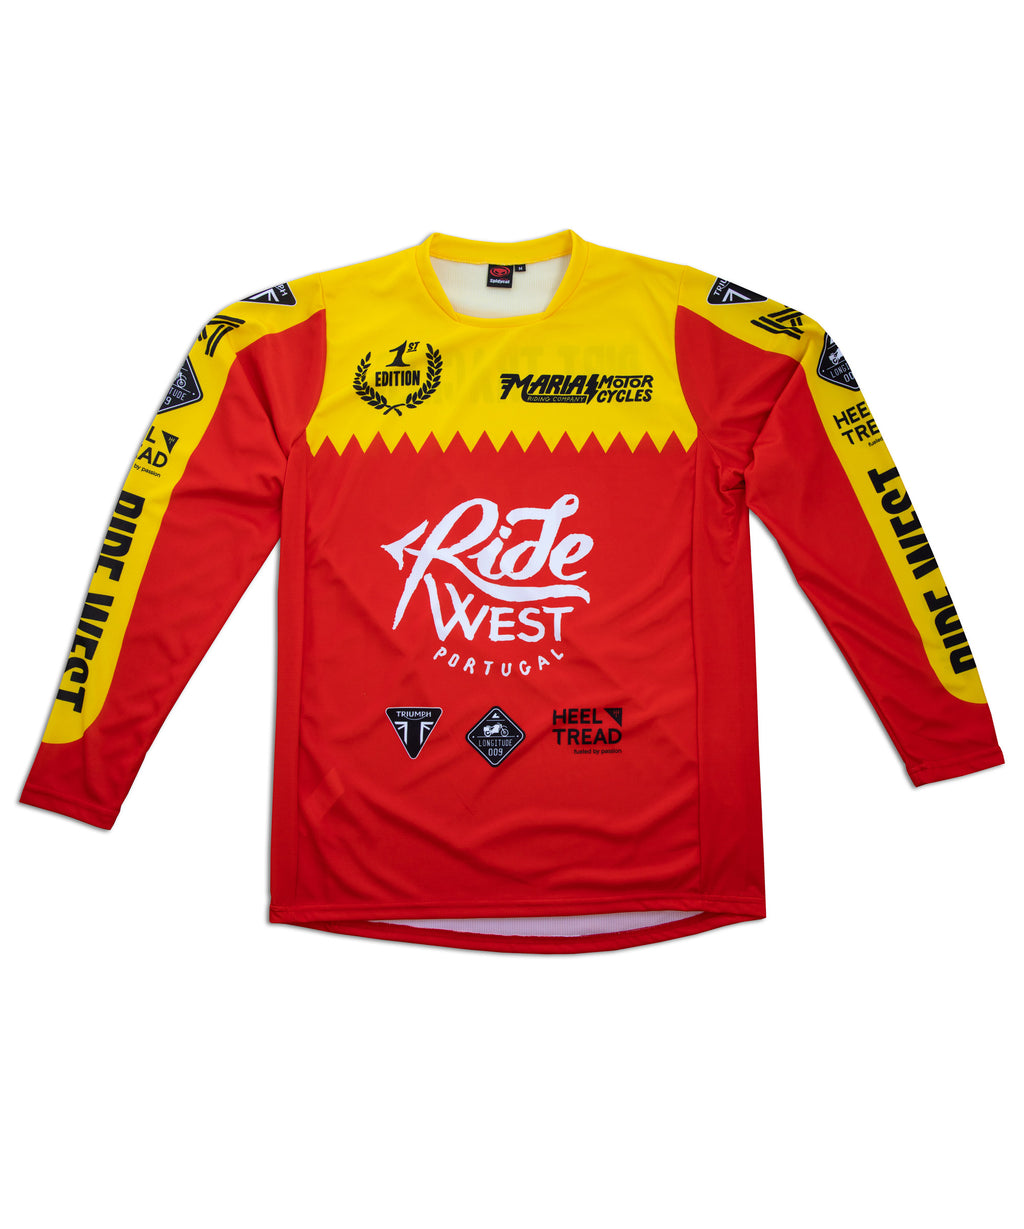 RIDEWEST Racing Jersey - 1st Edition